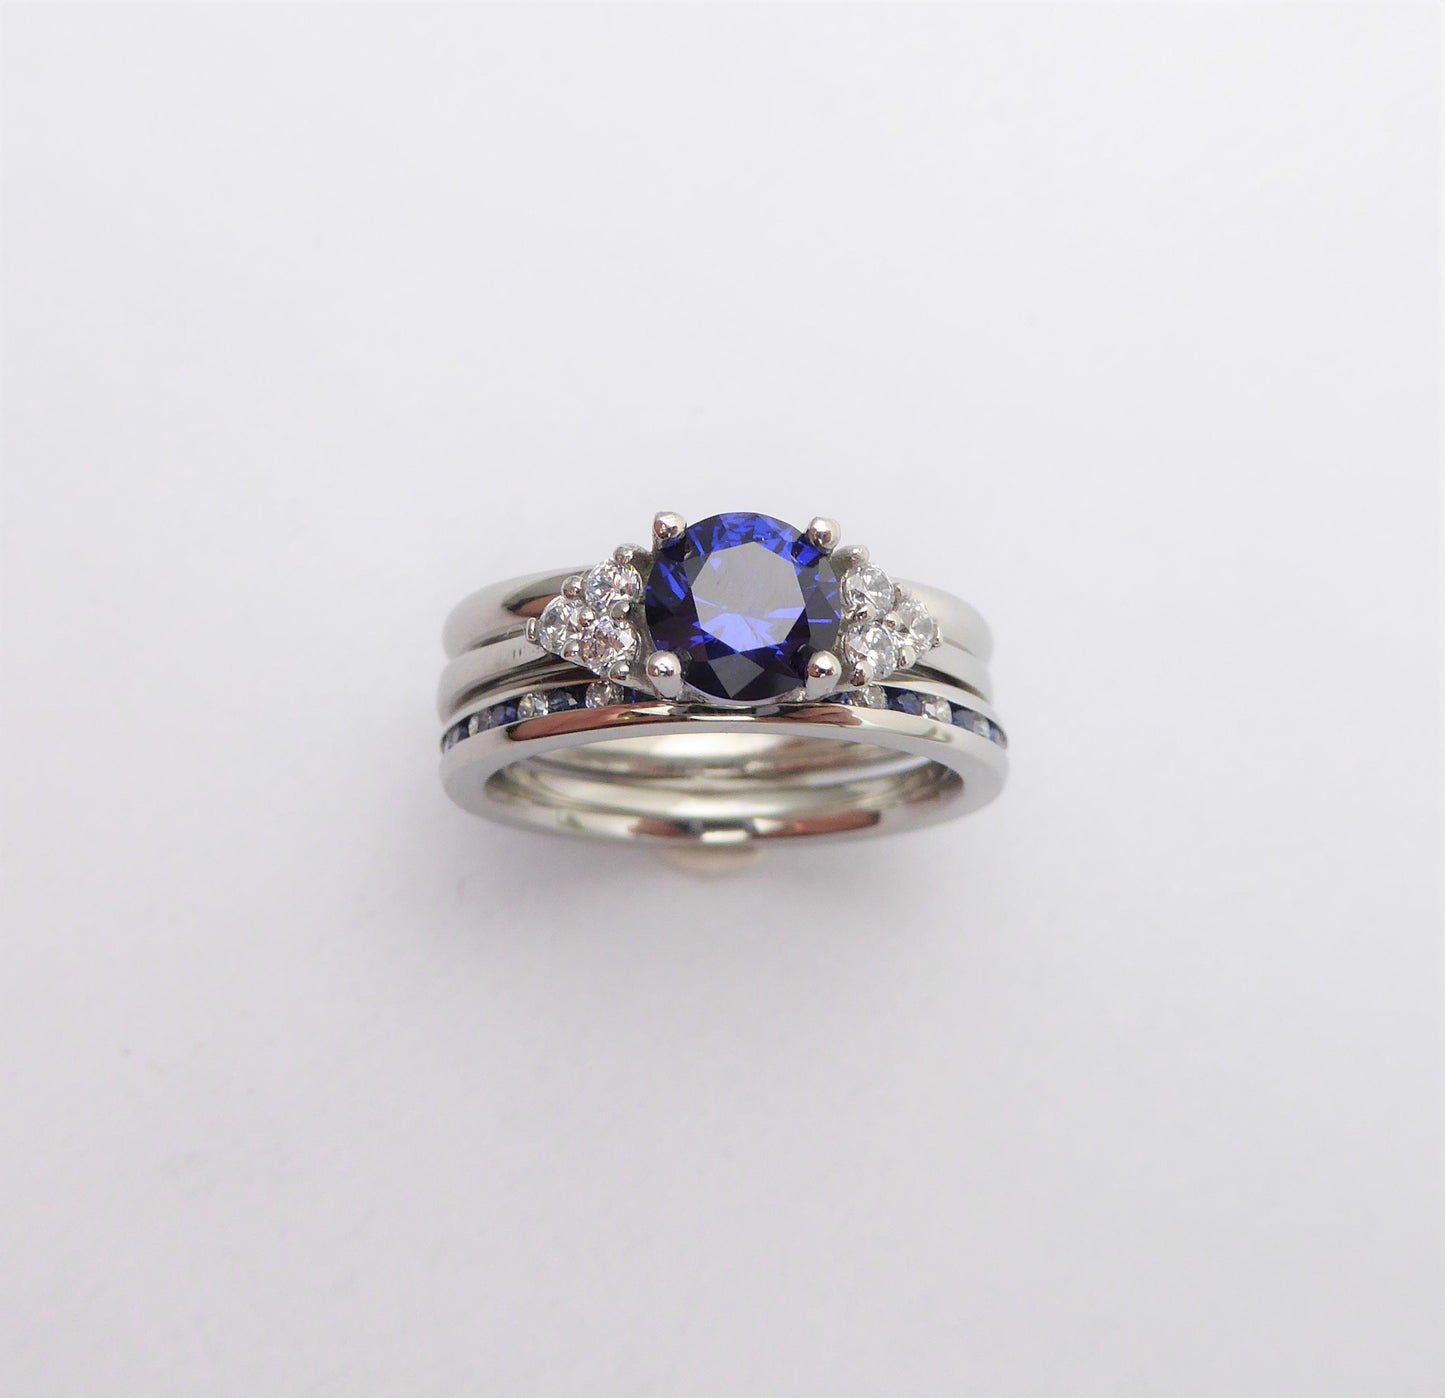 Wedding set! Blue Saphire engagment ring and matching eternity & Wedding ring in Titanium or White Gold